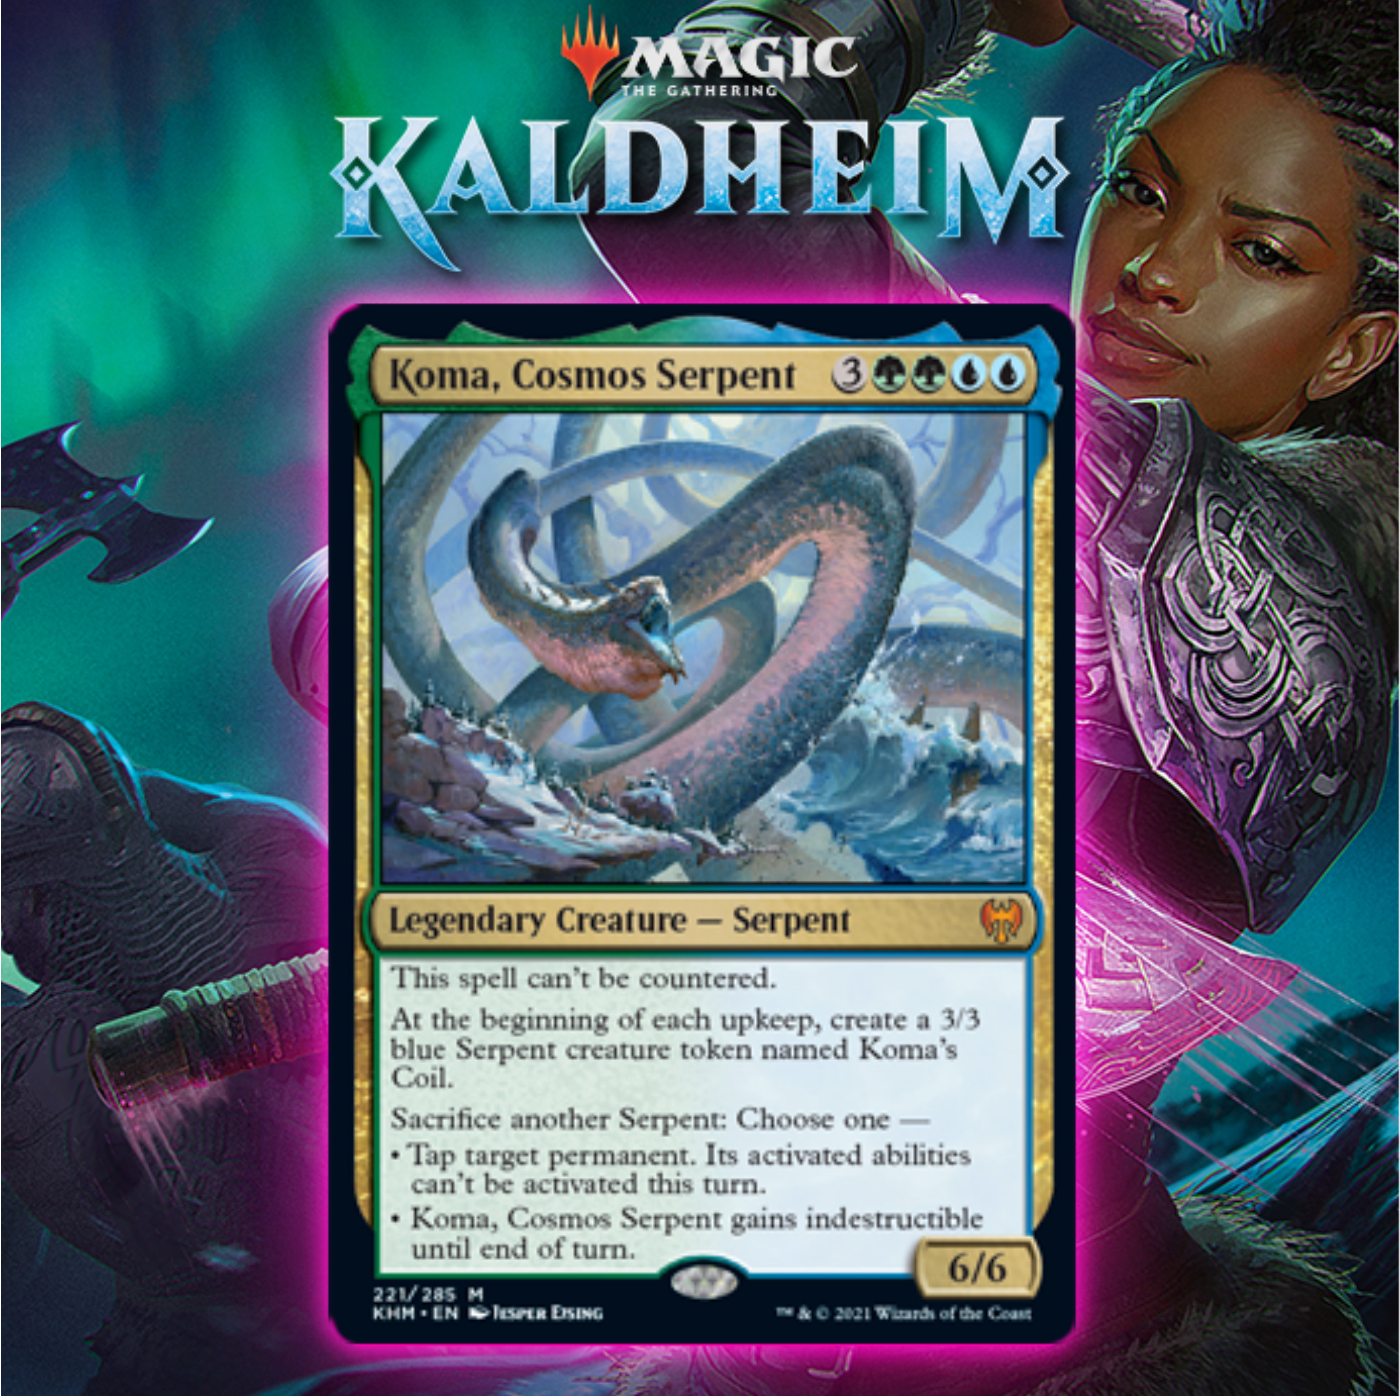 Simic Gets Mythic Rare Serpent In Koma, Cosmos Serpent In Kaldheim